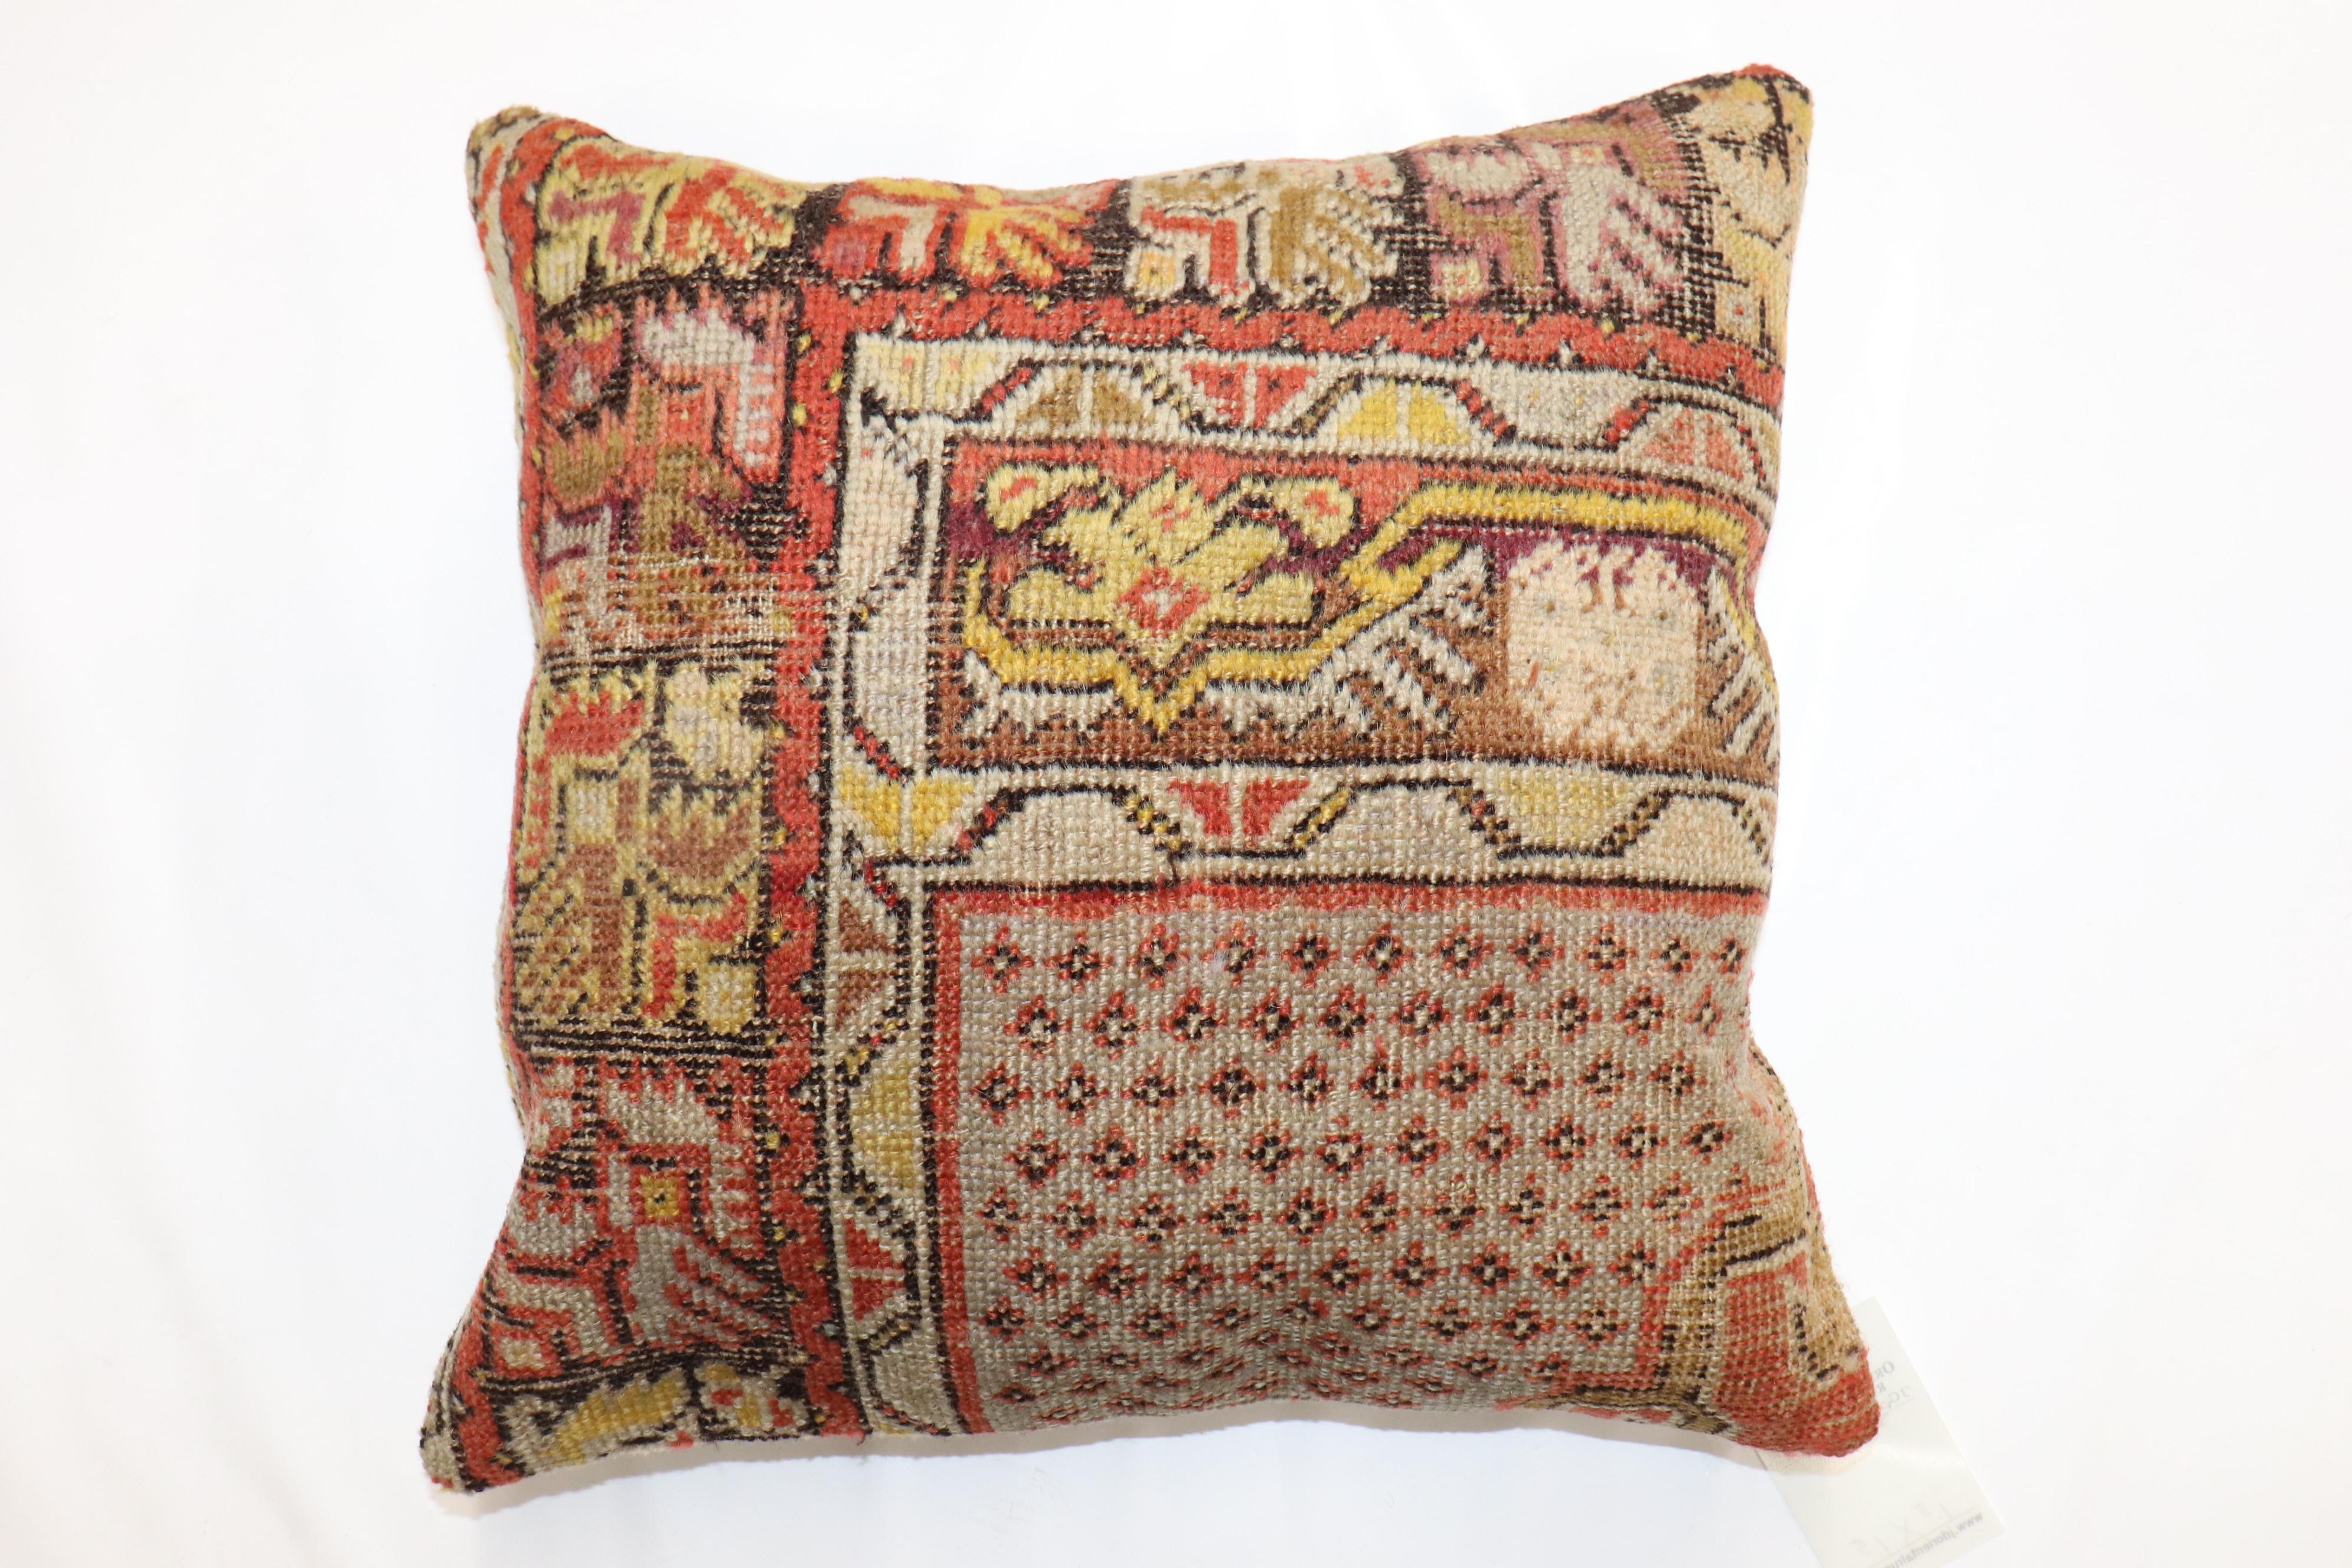 Pillow made from an early 20th century turkish rug. 

Measures: 17'' x 17''